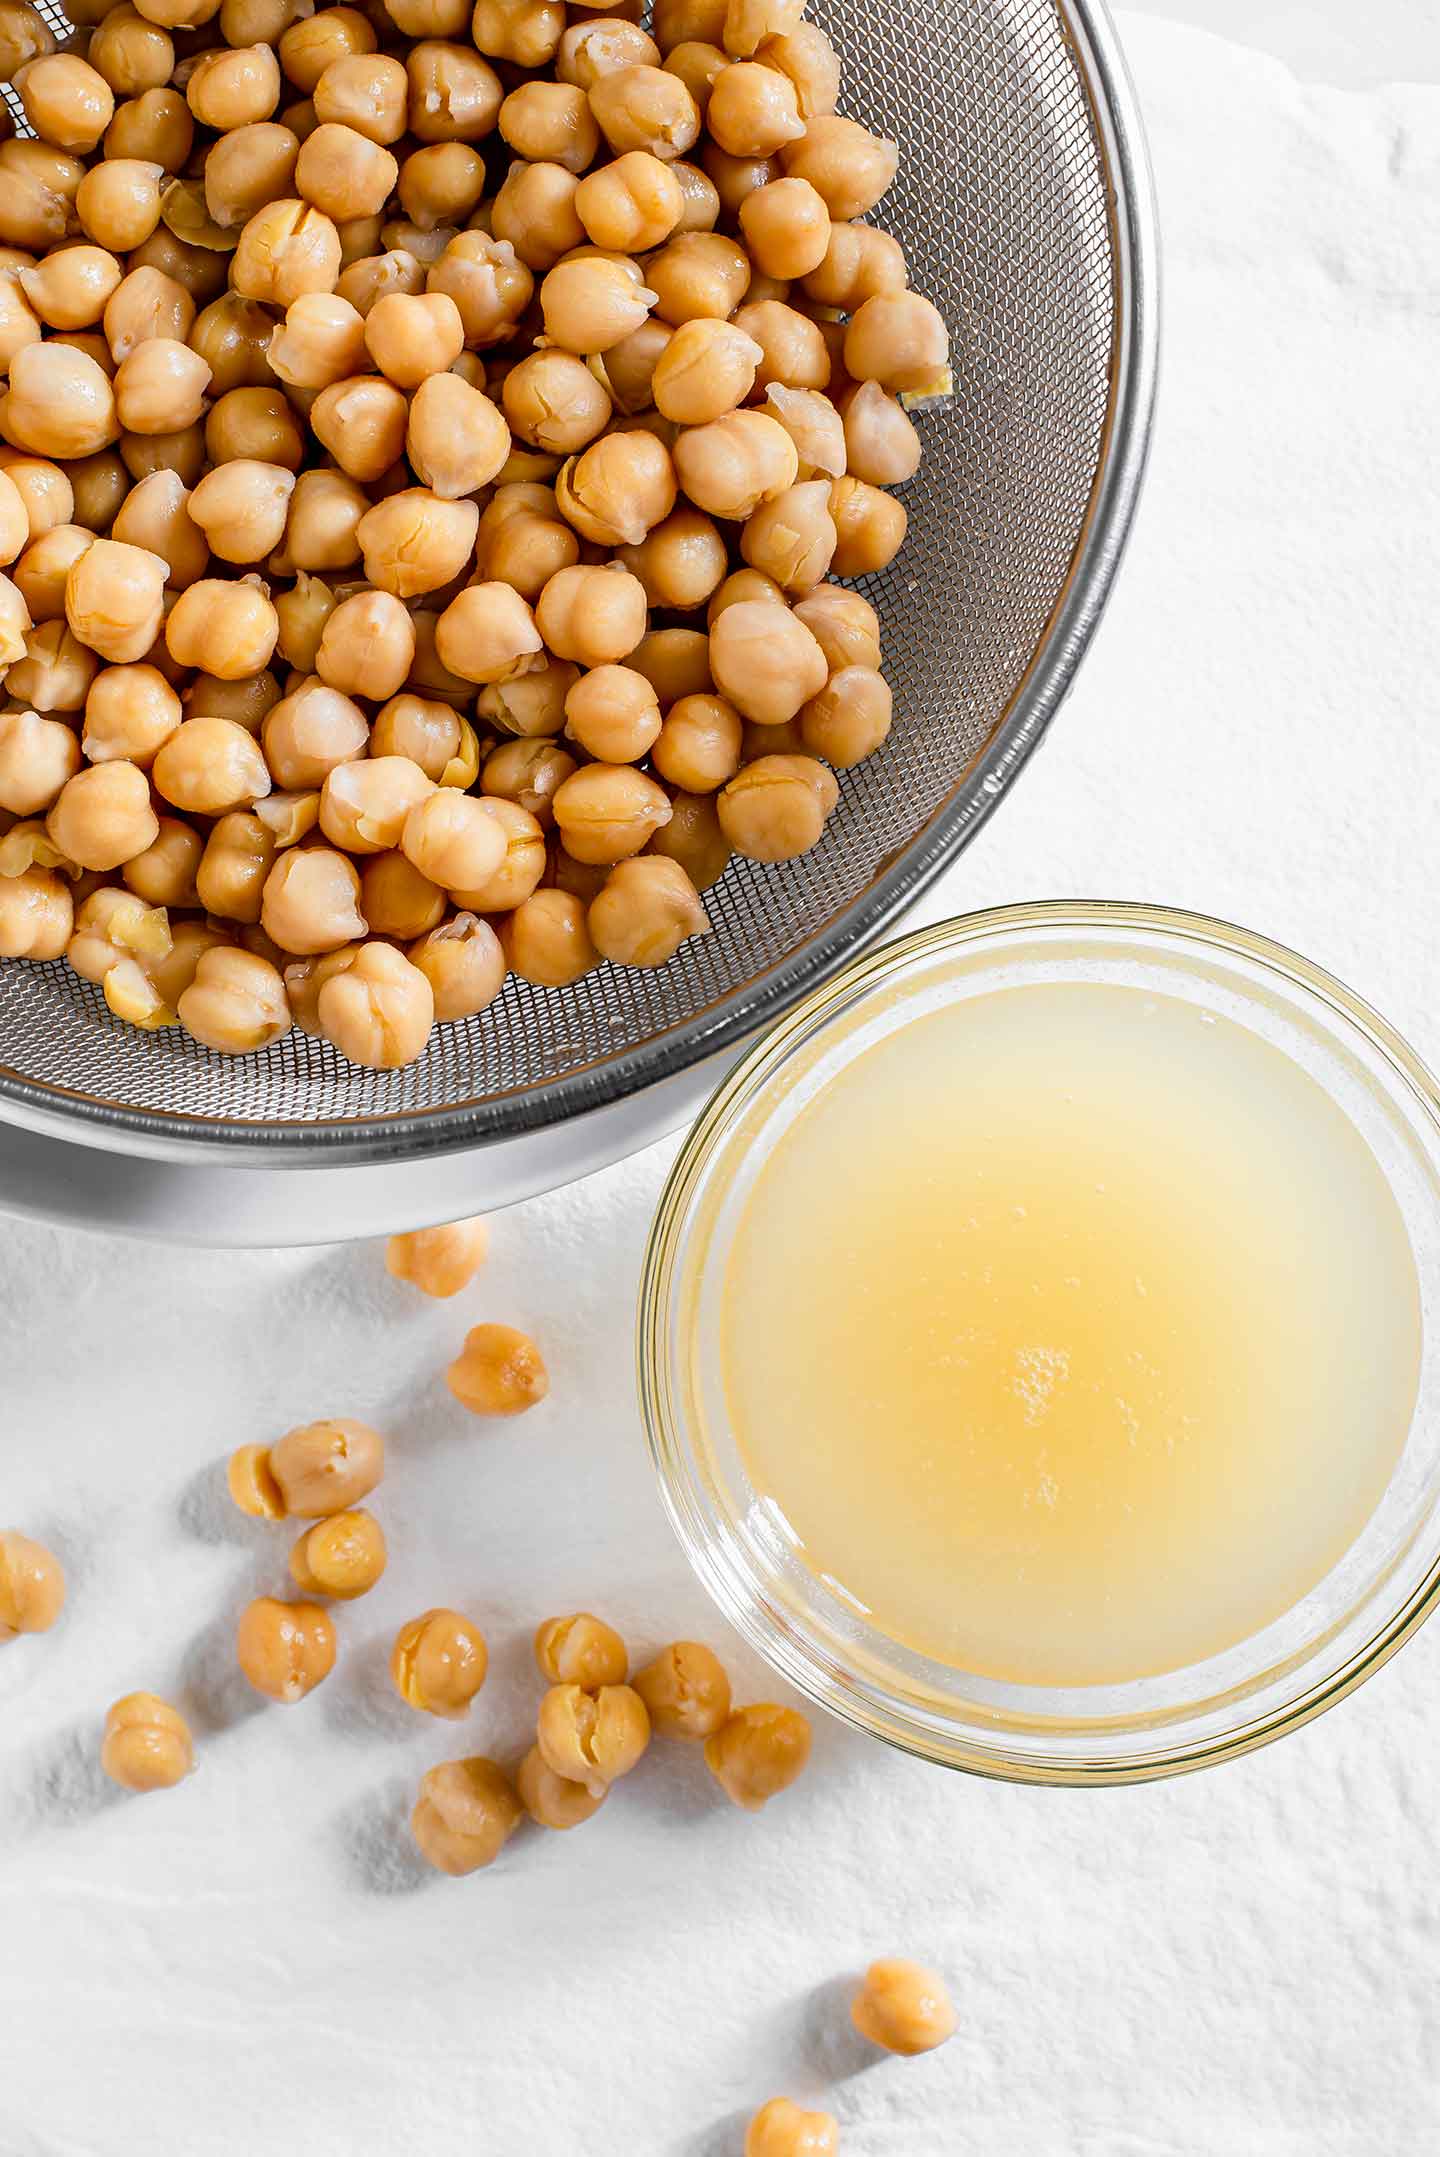 Top down view of chickpeas draining in a metal sieve with aquafaba reserved in a small bowl to the side.